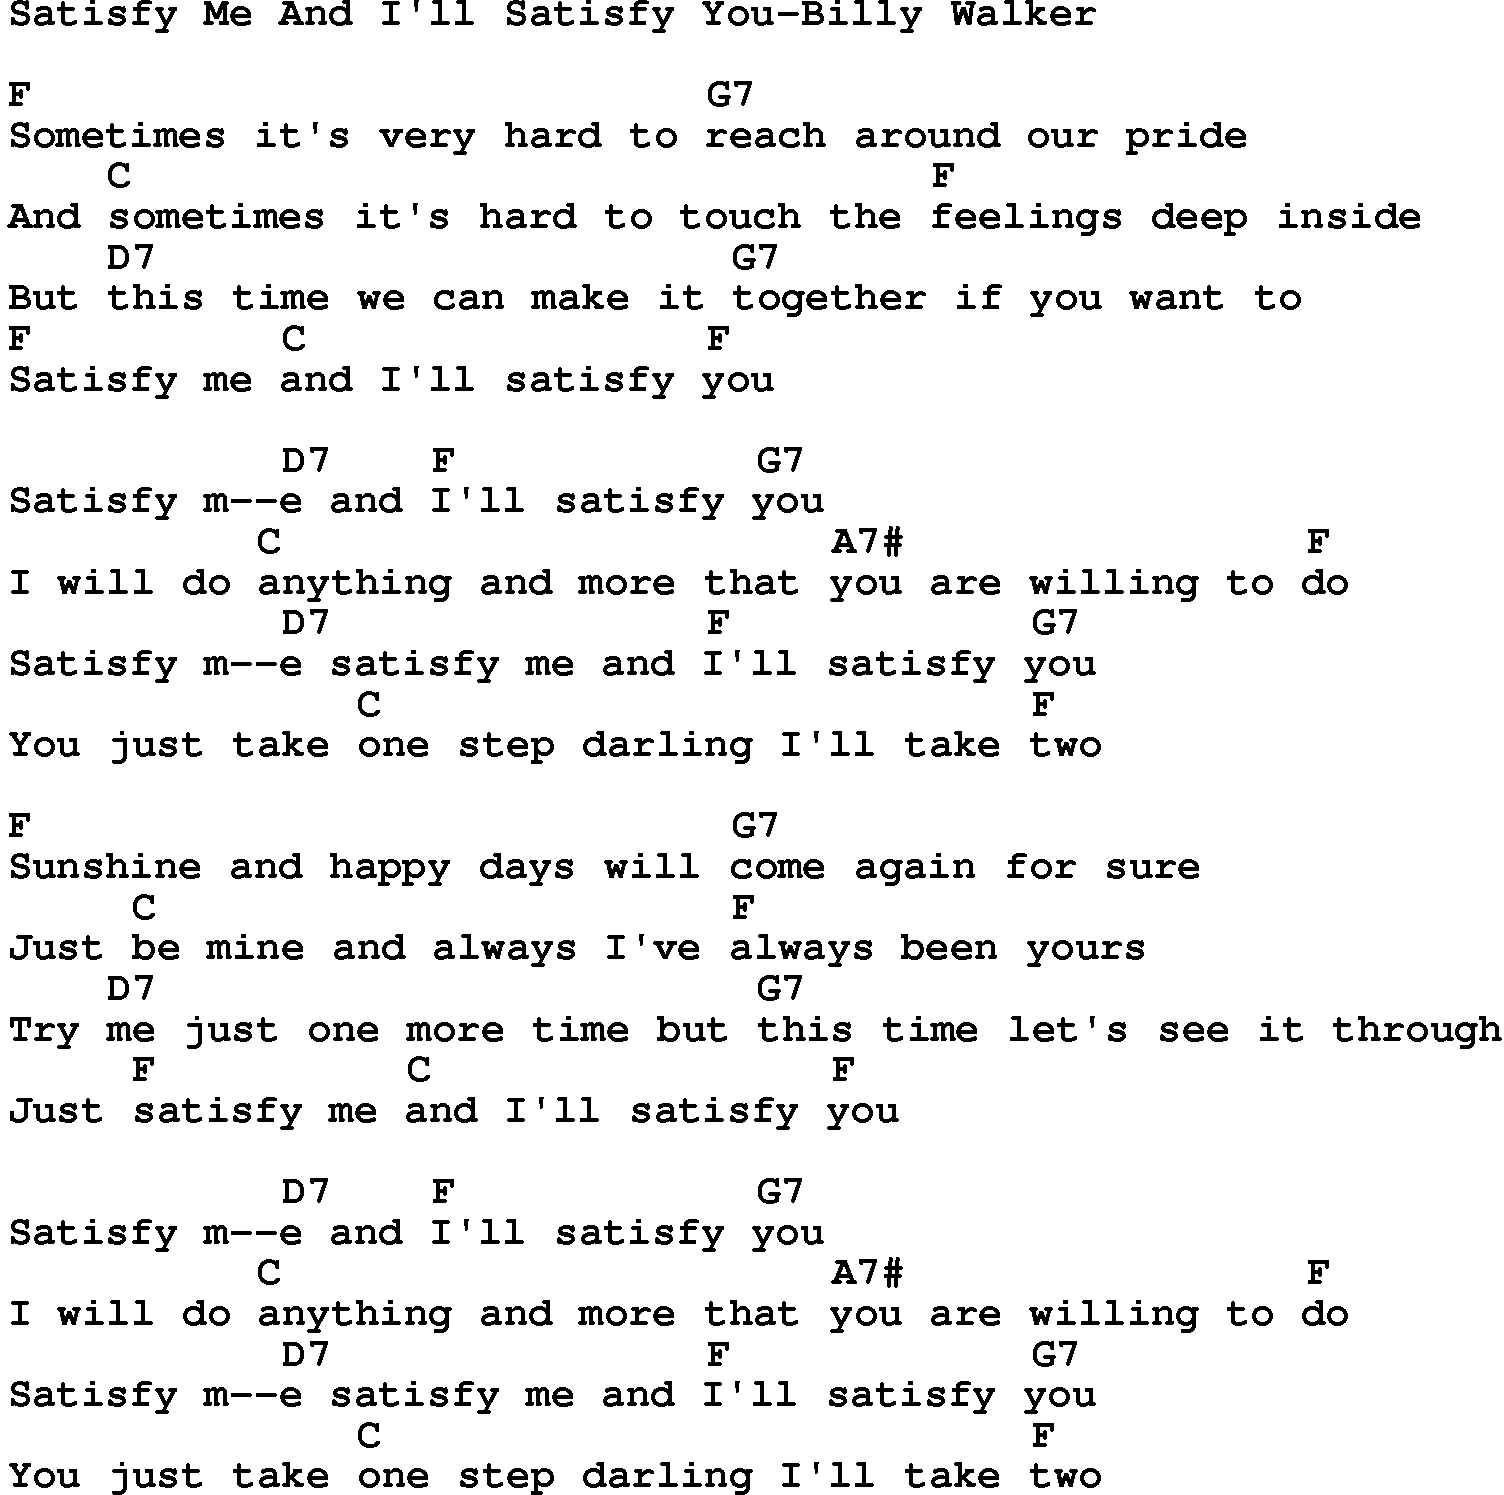 Country music song: Satisfy Me And I'll Satisfy You-Billy Walker lyrics and chords